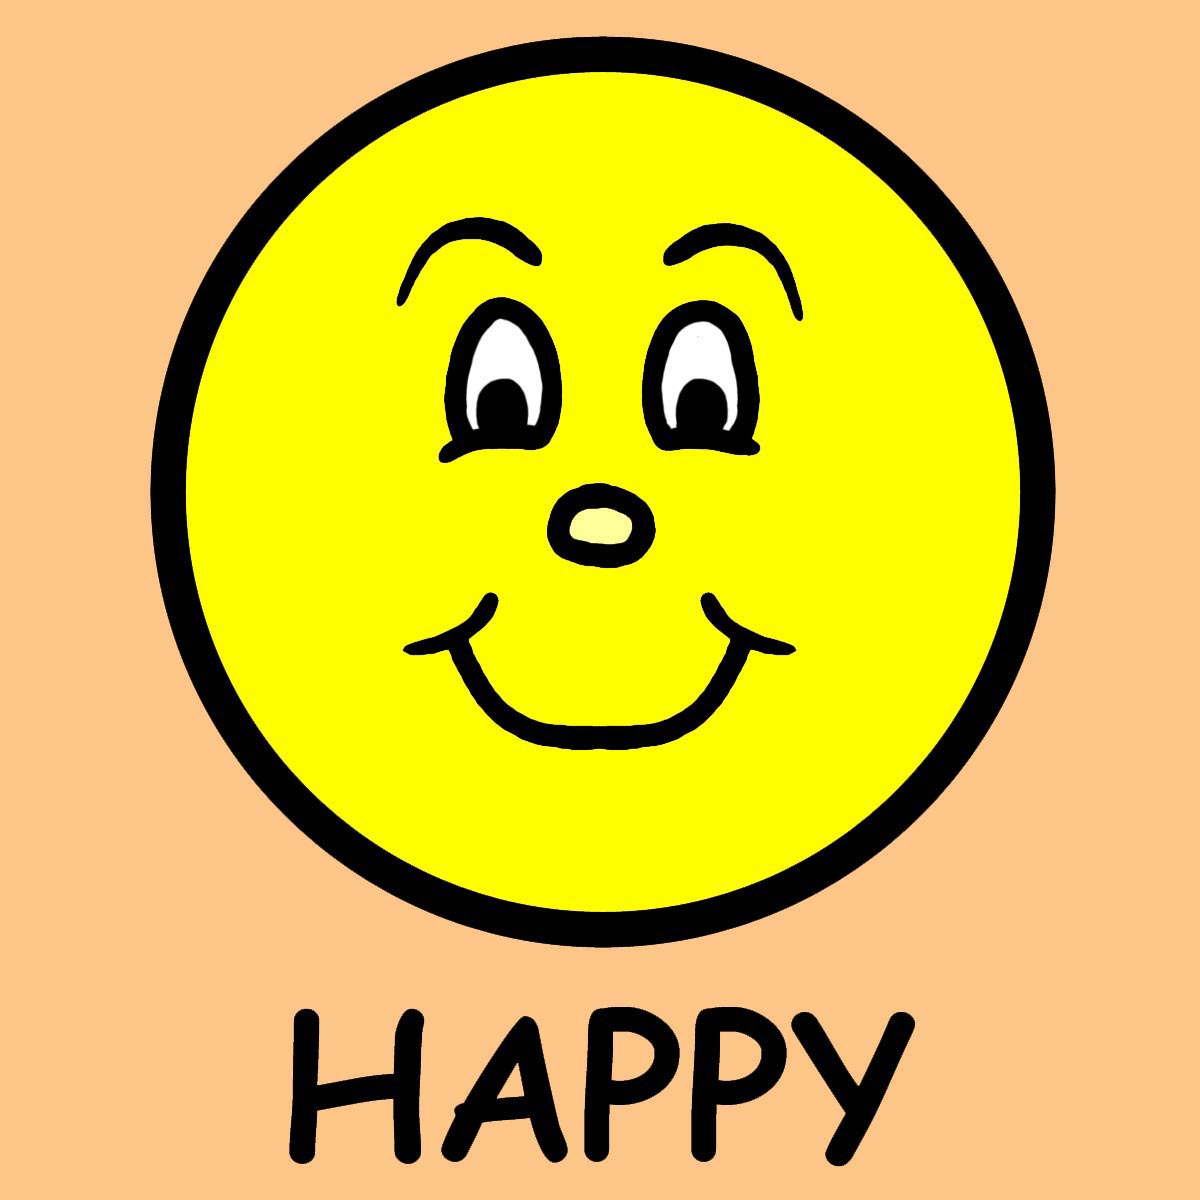 Happy Clip Art Pictures - Free Clipart Images